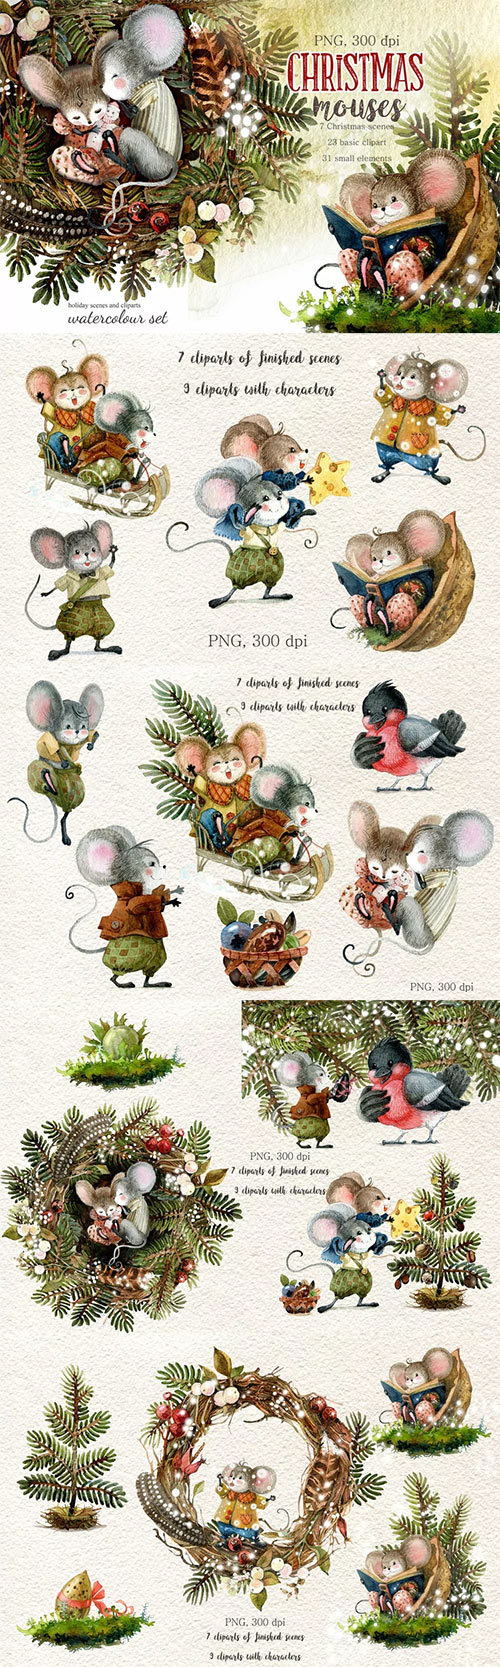 Christmas mouse. Watercolor cliparts 975534